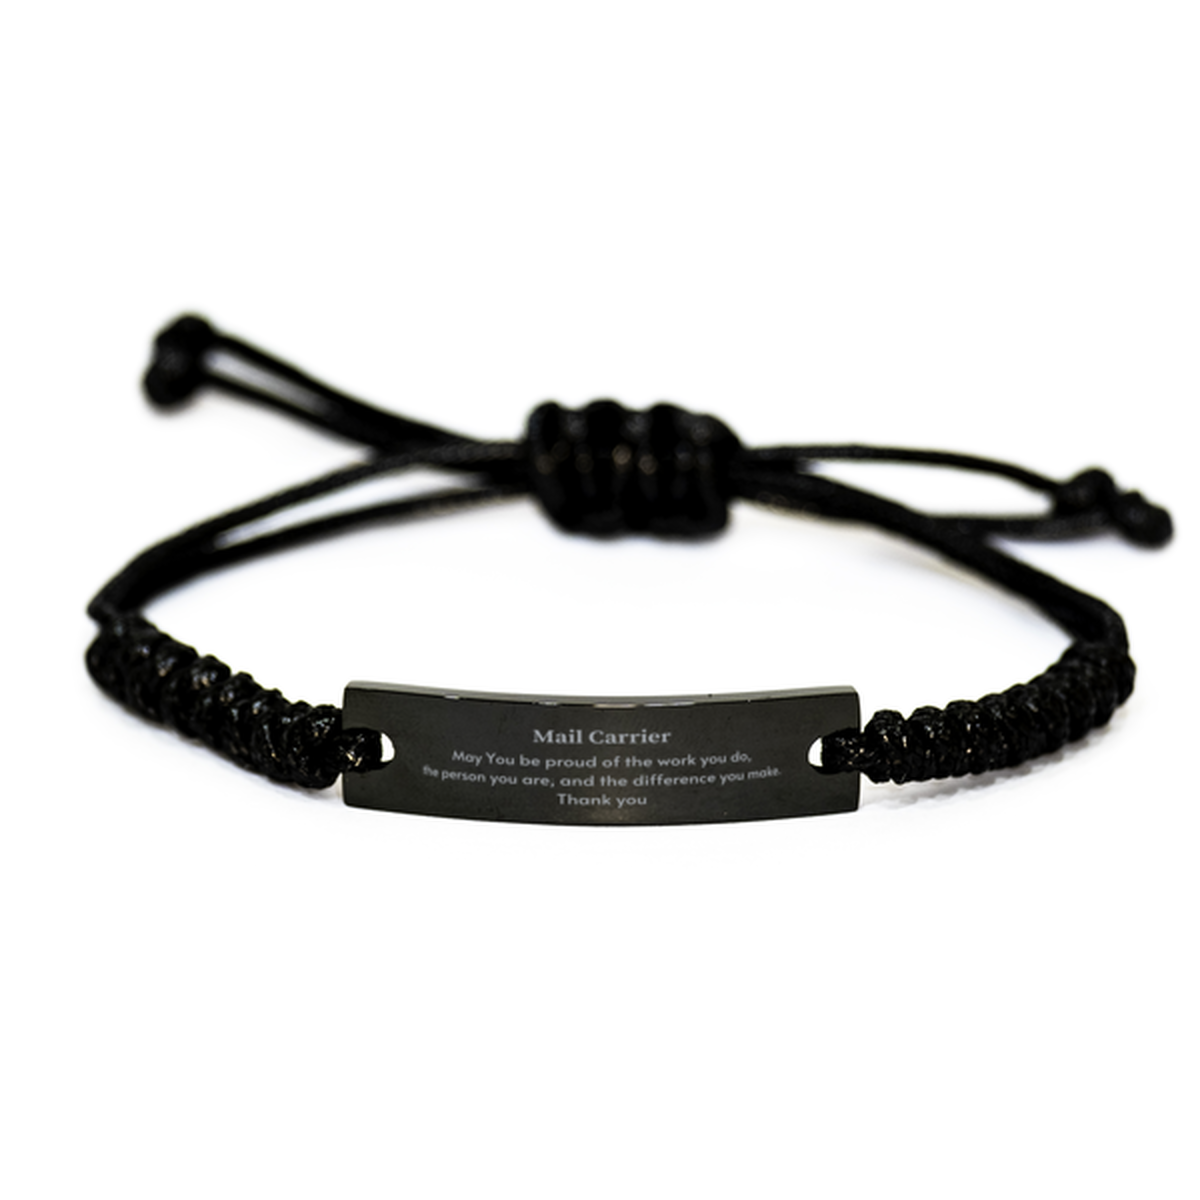 Heartwarming Black Rope Bracelet Retirement Coworkers Gifts for Mail Carrier, Mail Carrier May You be proud of the work you do, the person you are Gifts for Boss Men Women Friends